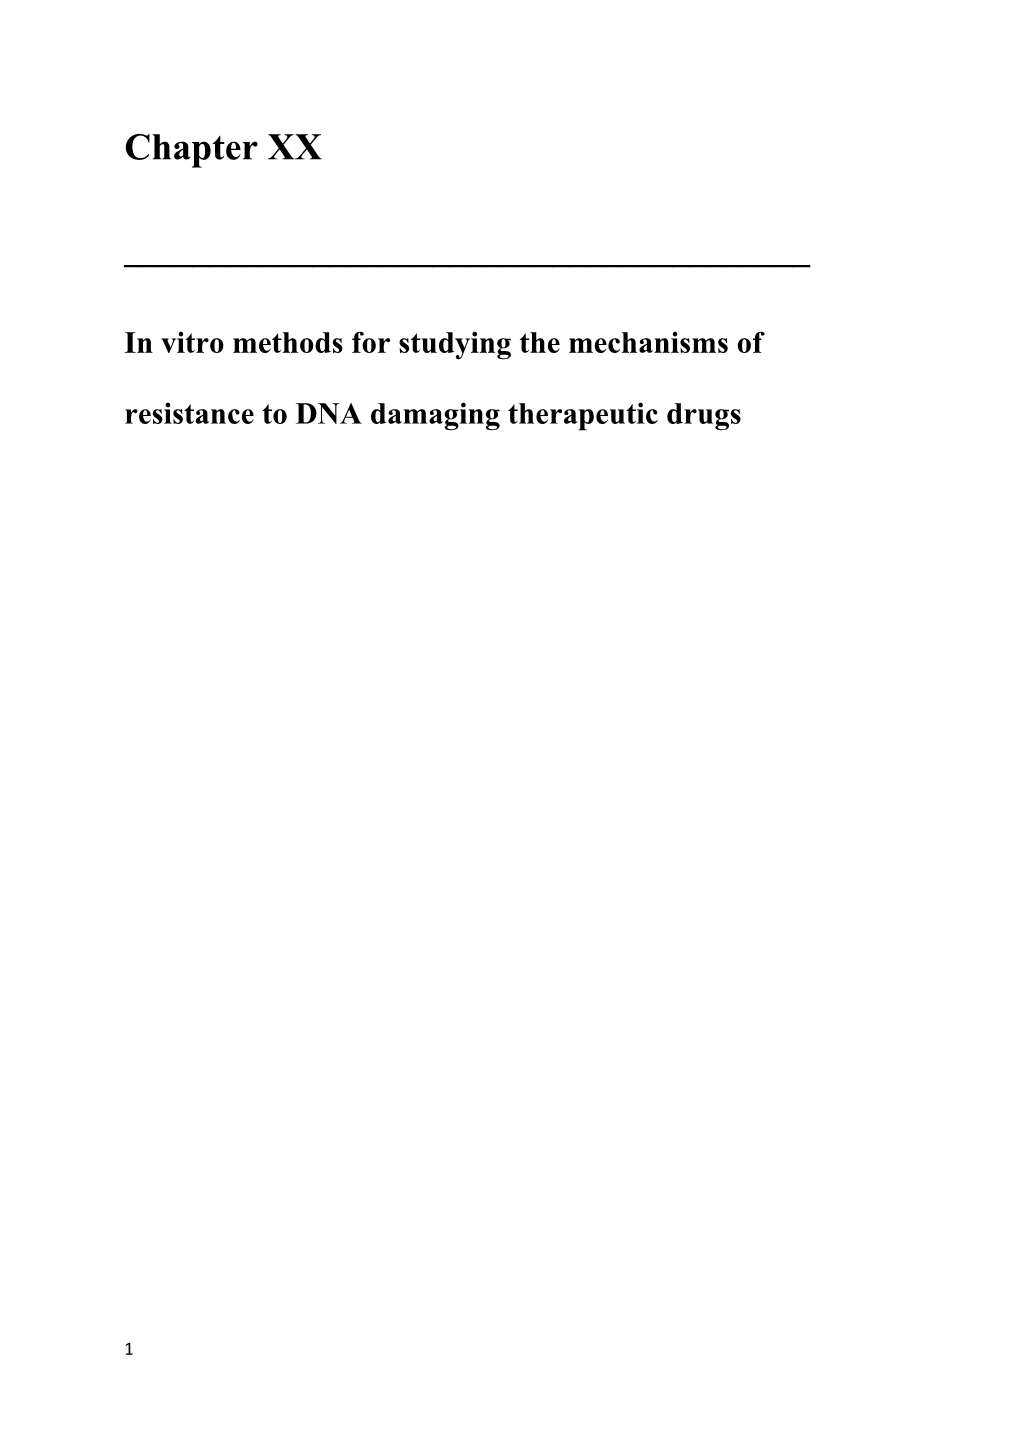 In Vitro Methods for Studying the Mechanisms of Resistance to DNA Damaging Therapeutic Drugs